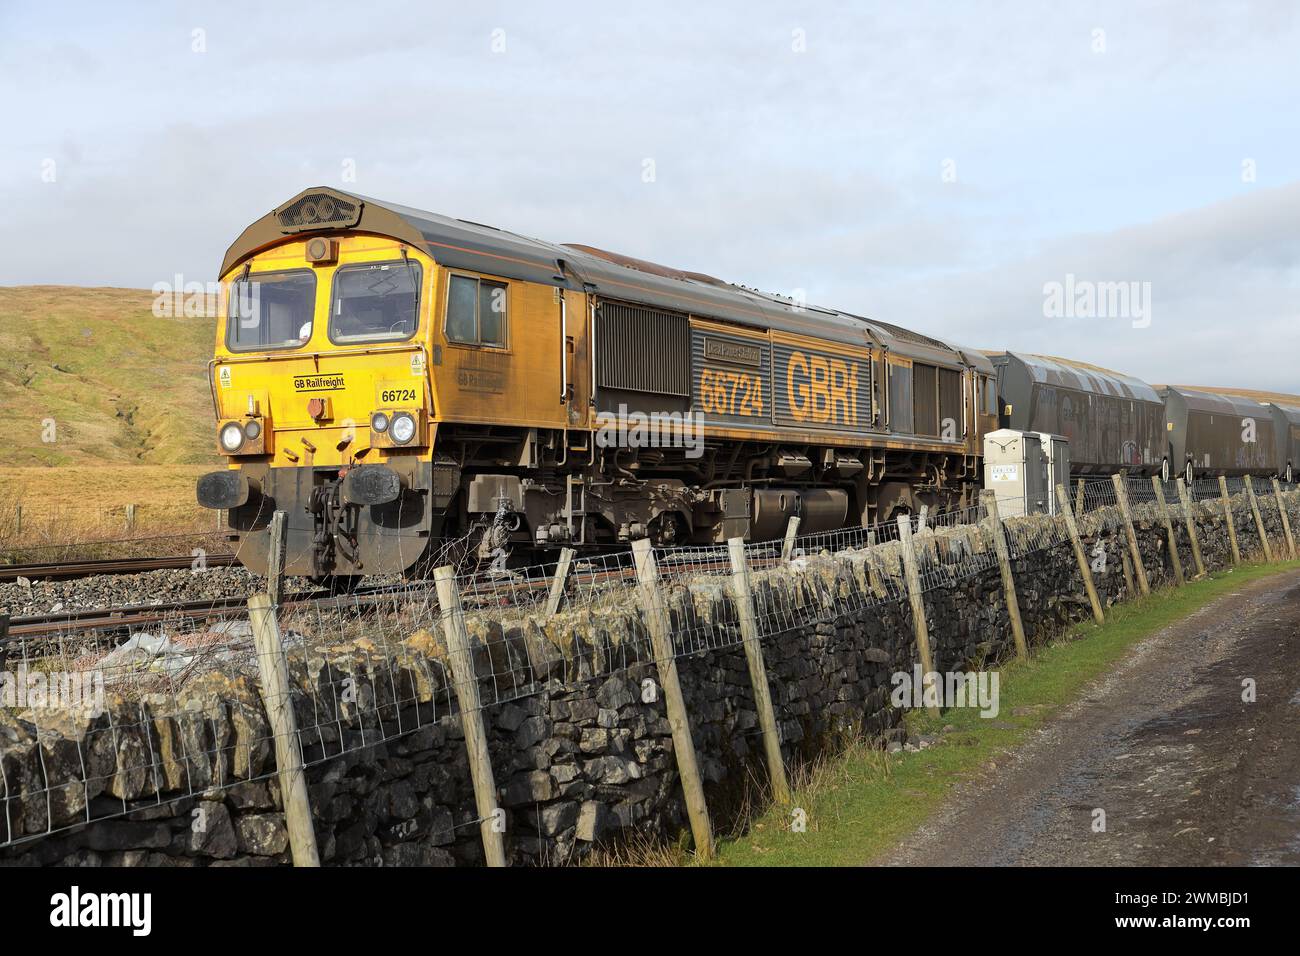 Freight train with a Drax Power Station Badge on the side on the Settle to Carlisle railway at the Bleamoor Sidings near Ribblehead, Yorkshire Dales, Stock Photo